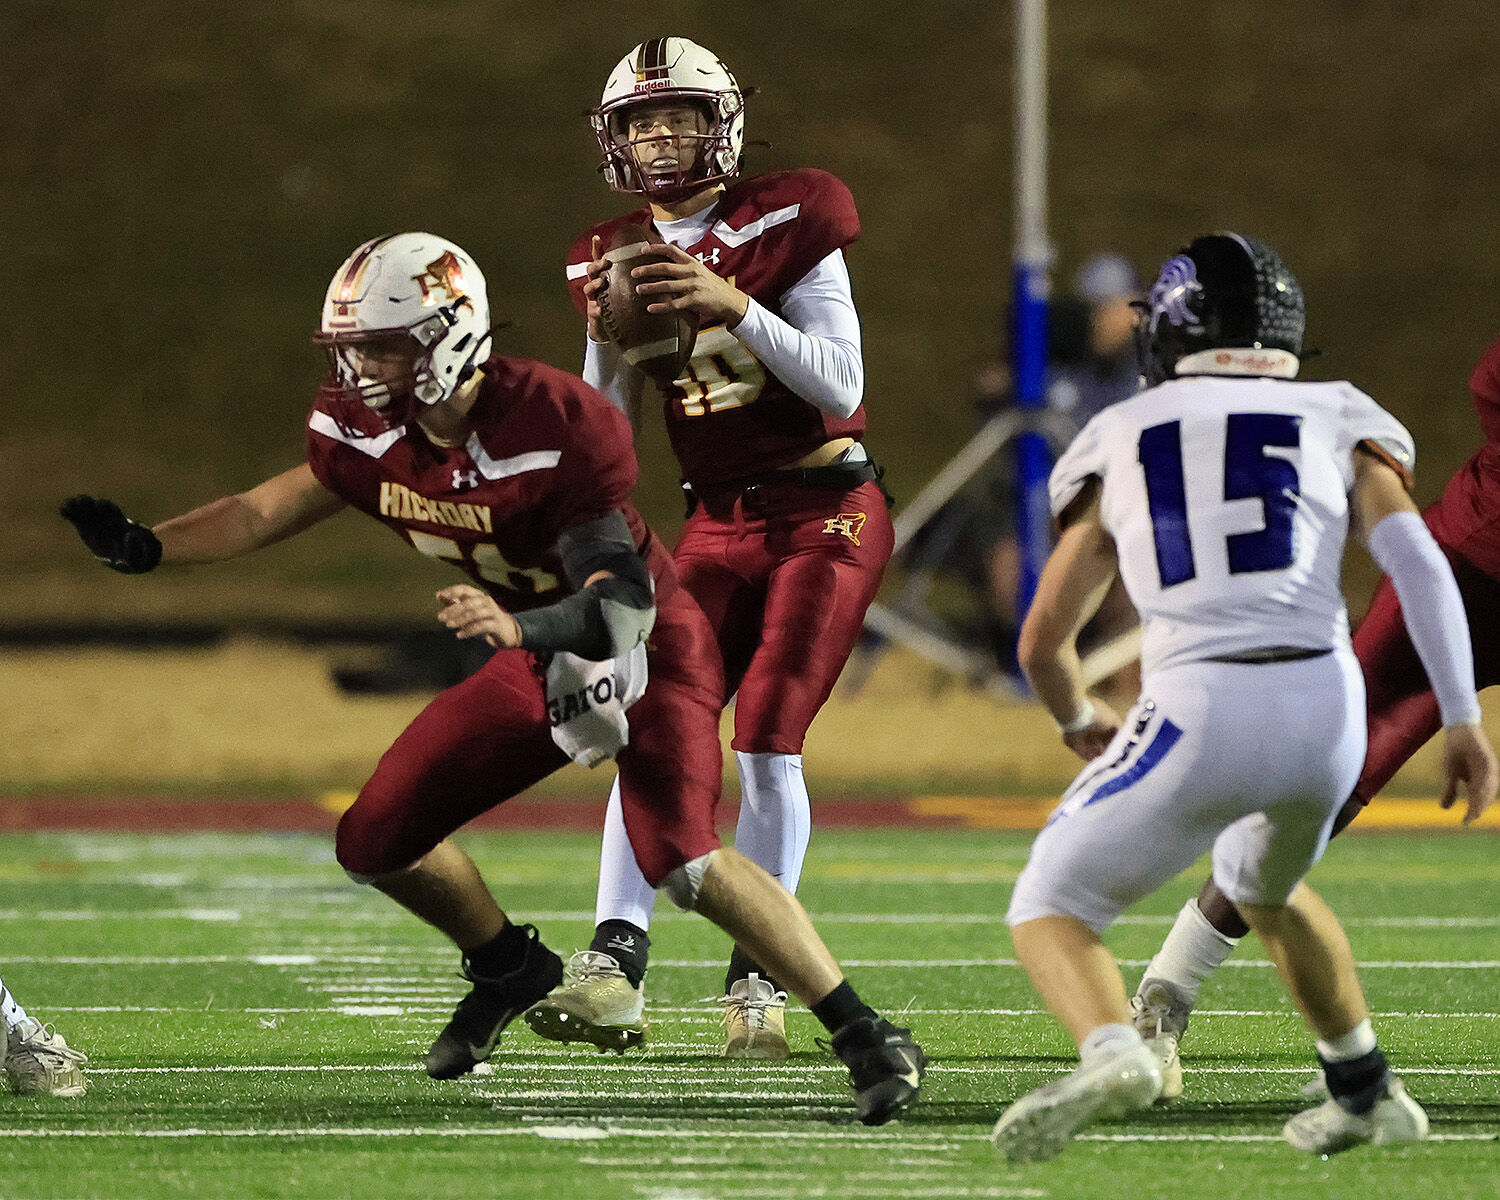 Hickory Red Tornadoes Football Team Secures Perfect 10-0 Record to Win Championship